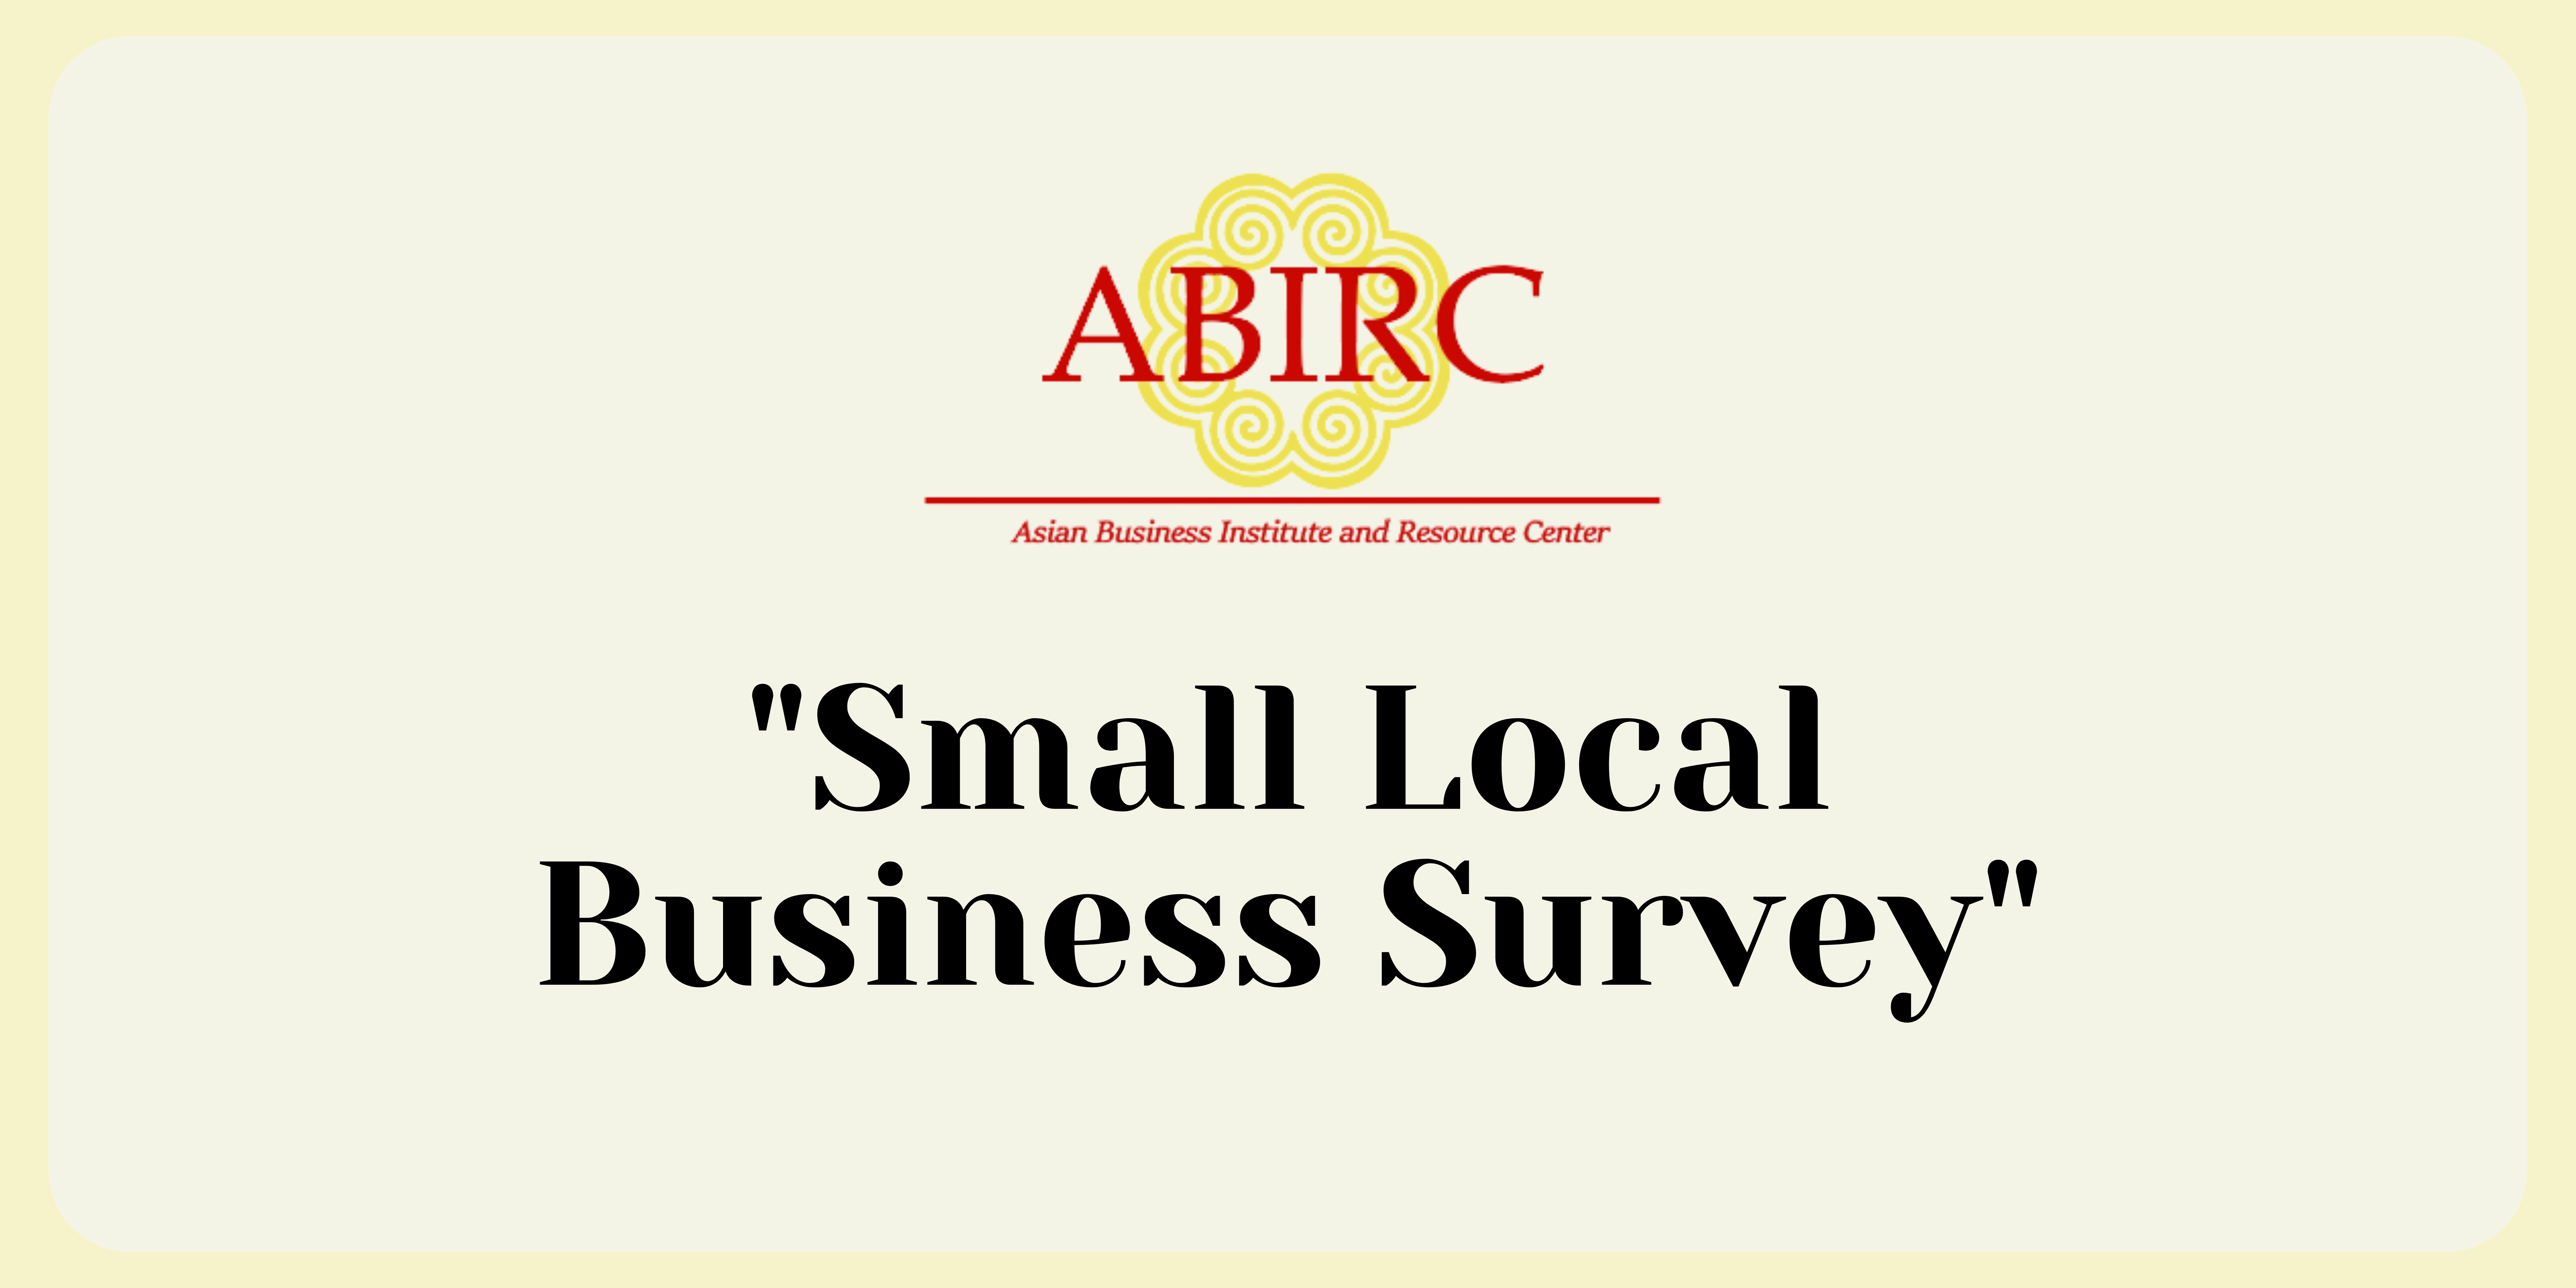 Small Local Business Survey